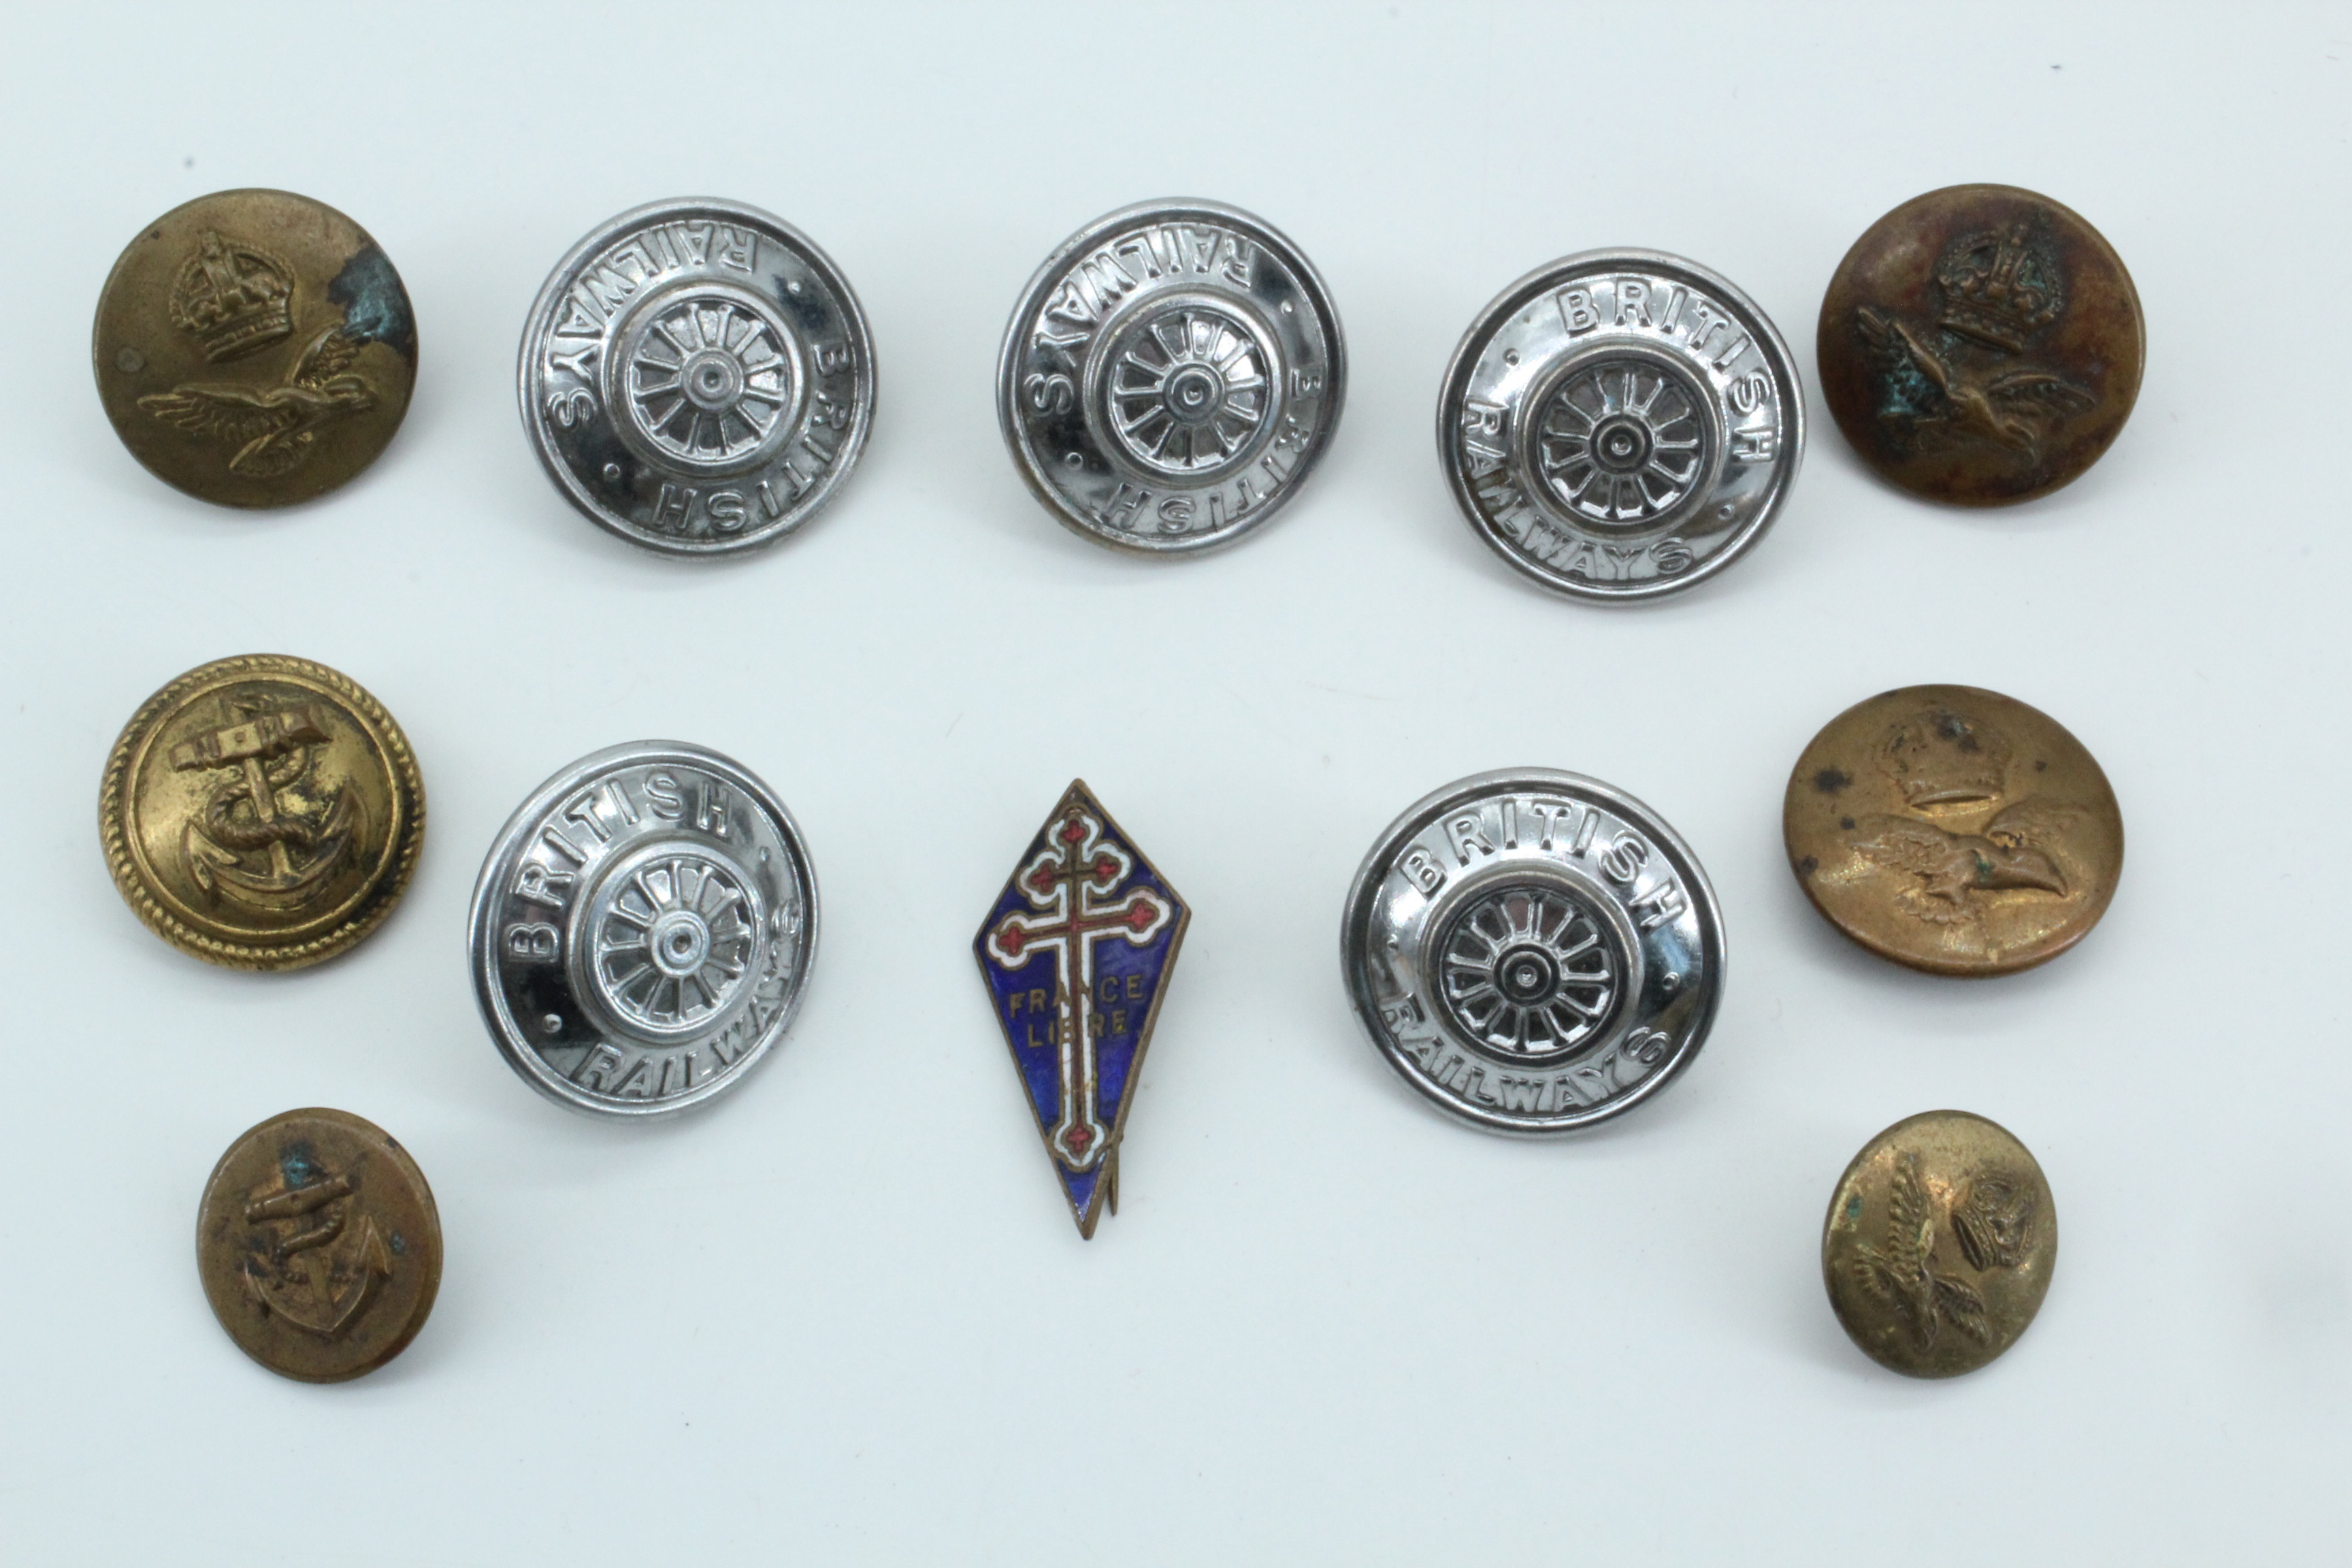 RAF and other buttons together with a Free French patriotic enamelled lapel badge